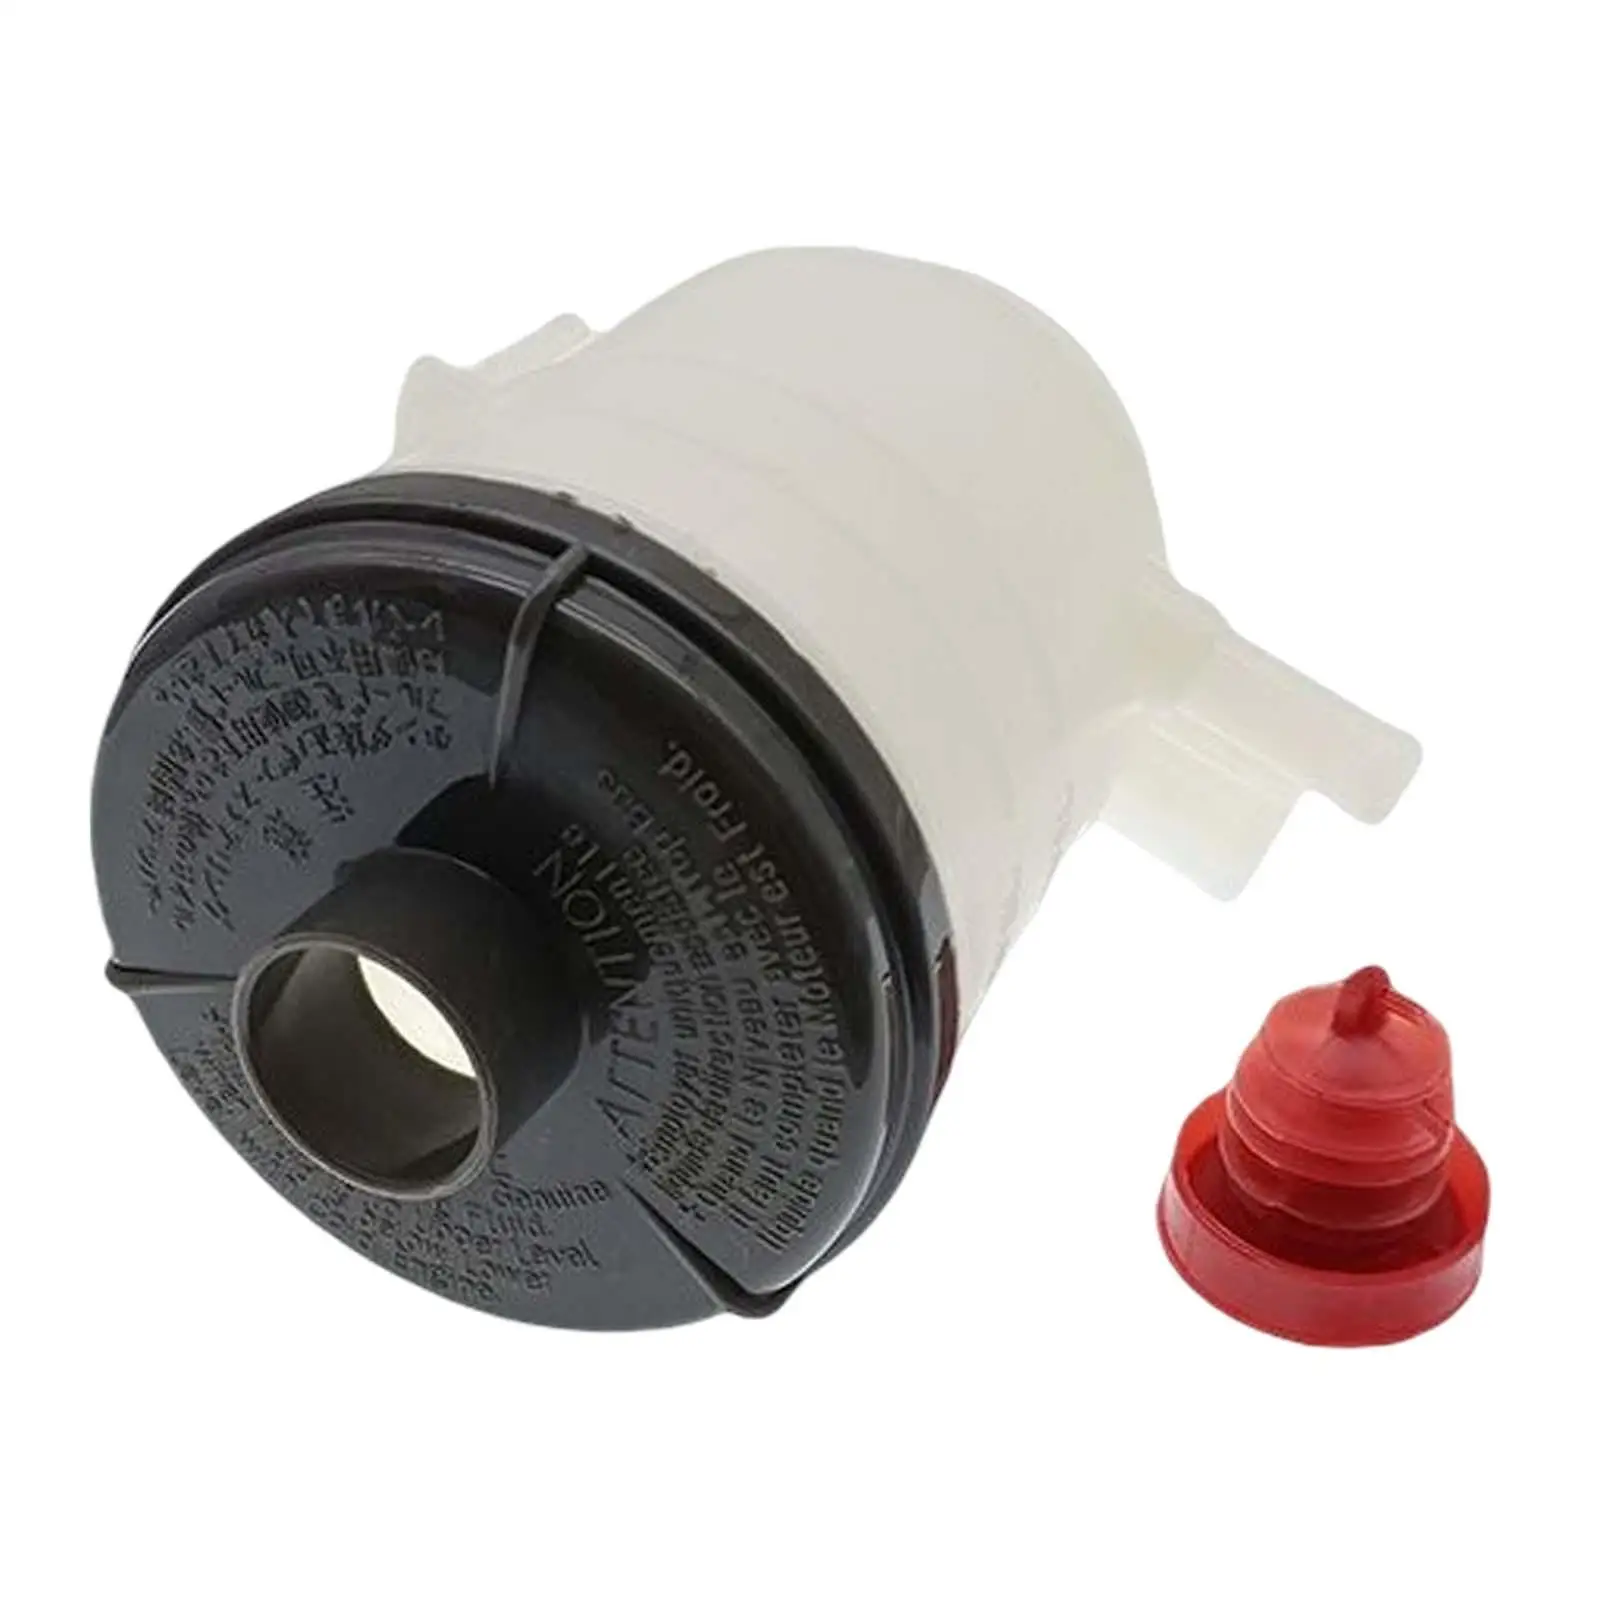 Booster Pump Oil Cup Replaces Portable Accessories Durable Practical Power Steering Pump Reservoir for Honda Accord 98-02